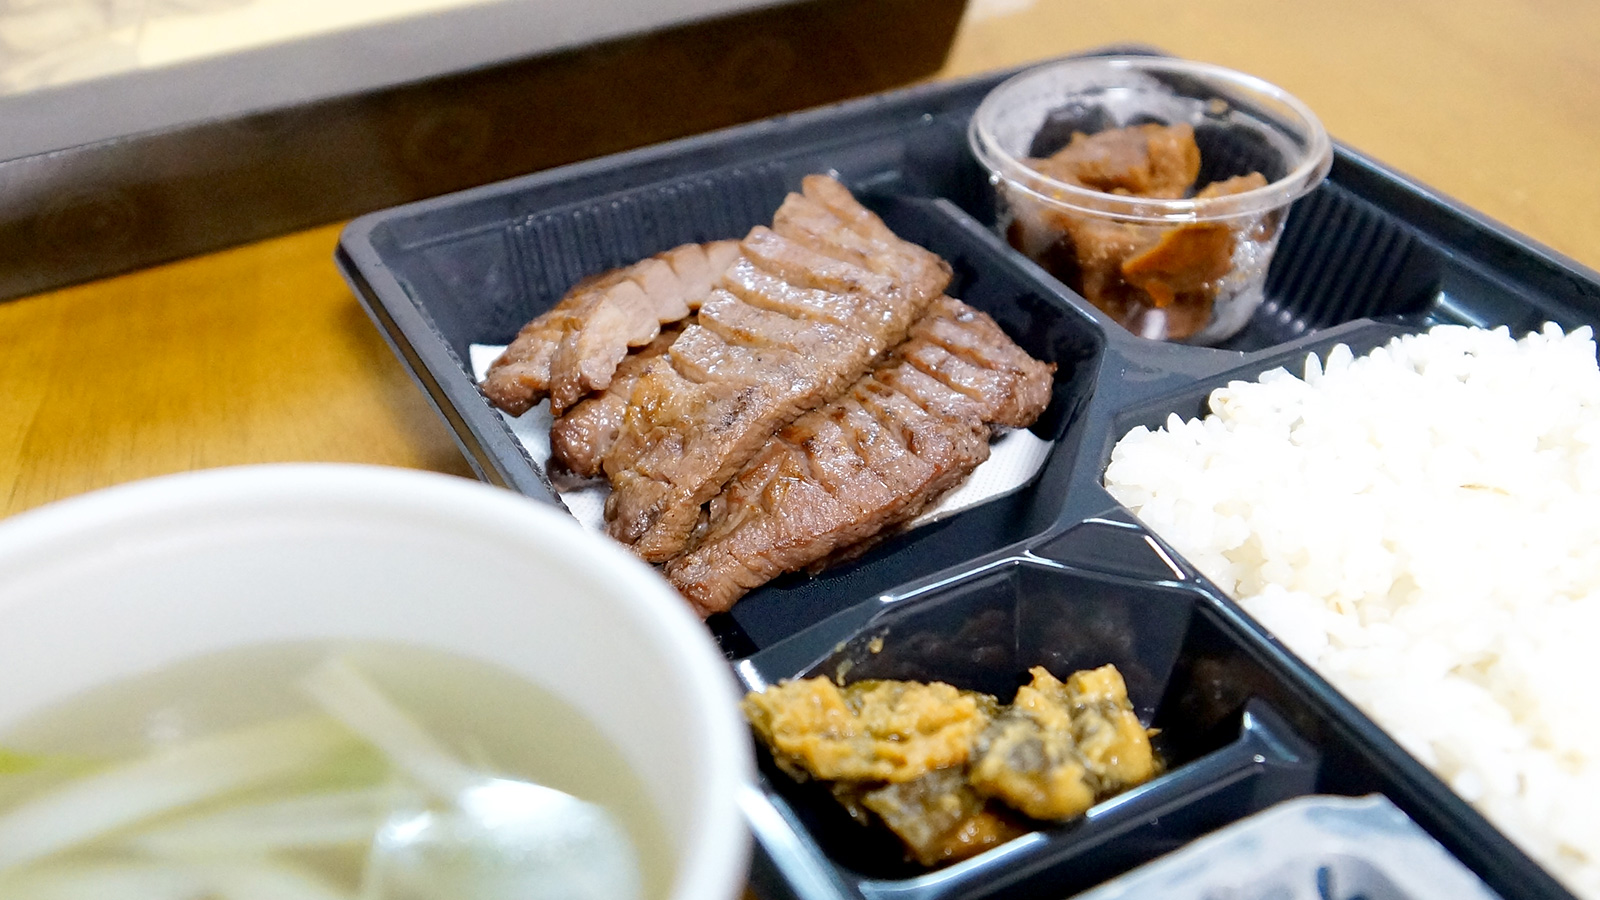 Tasting the ultimate beef tongue even from your home! Rikyu’s “Beef tongue lunch box”